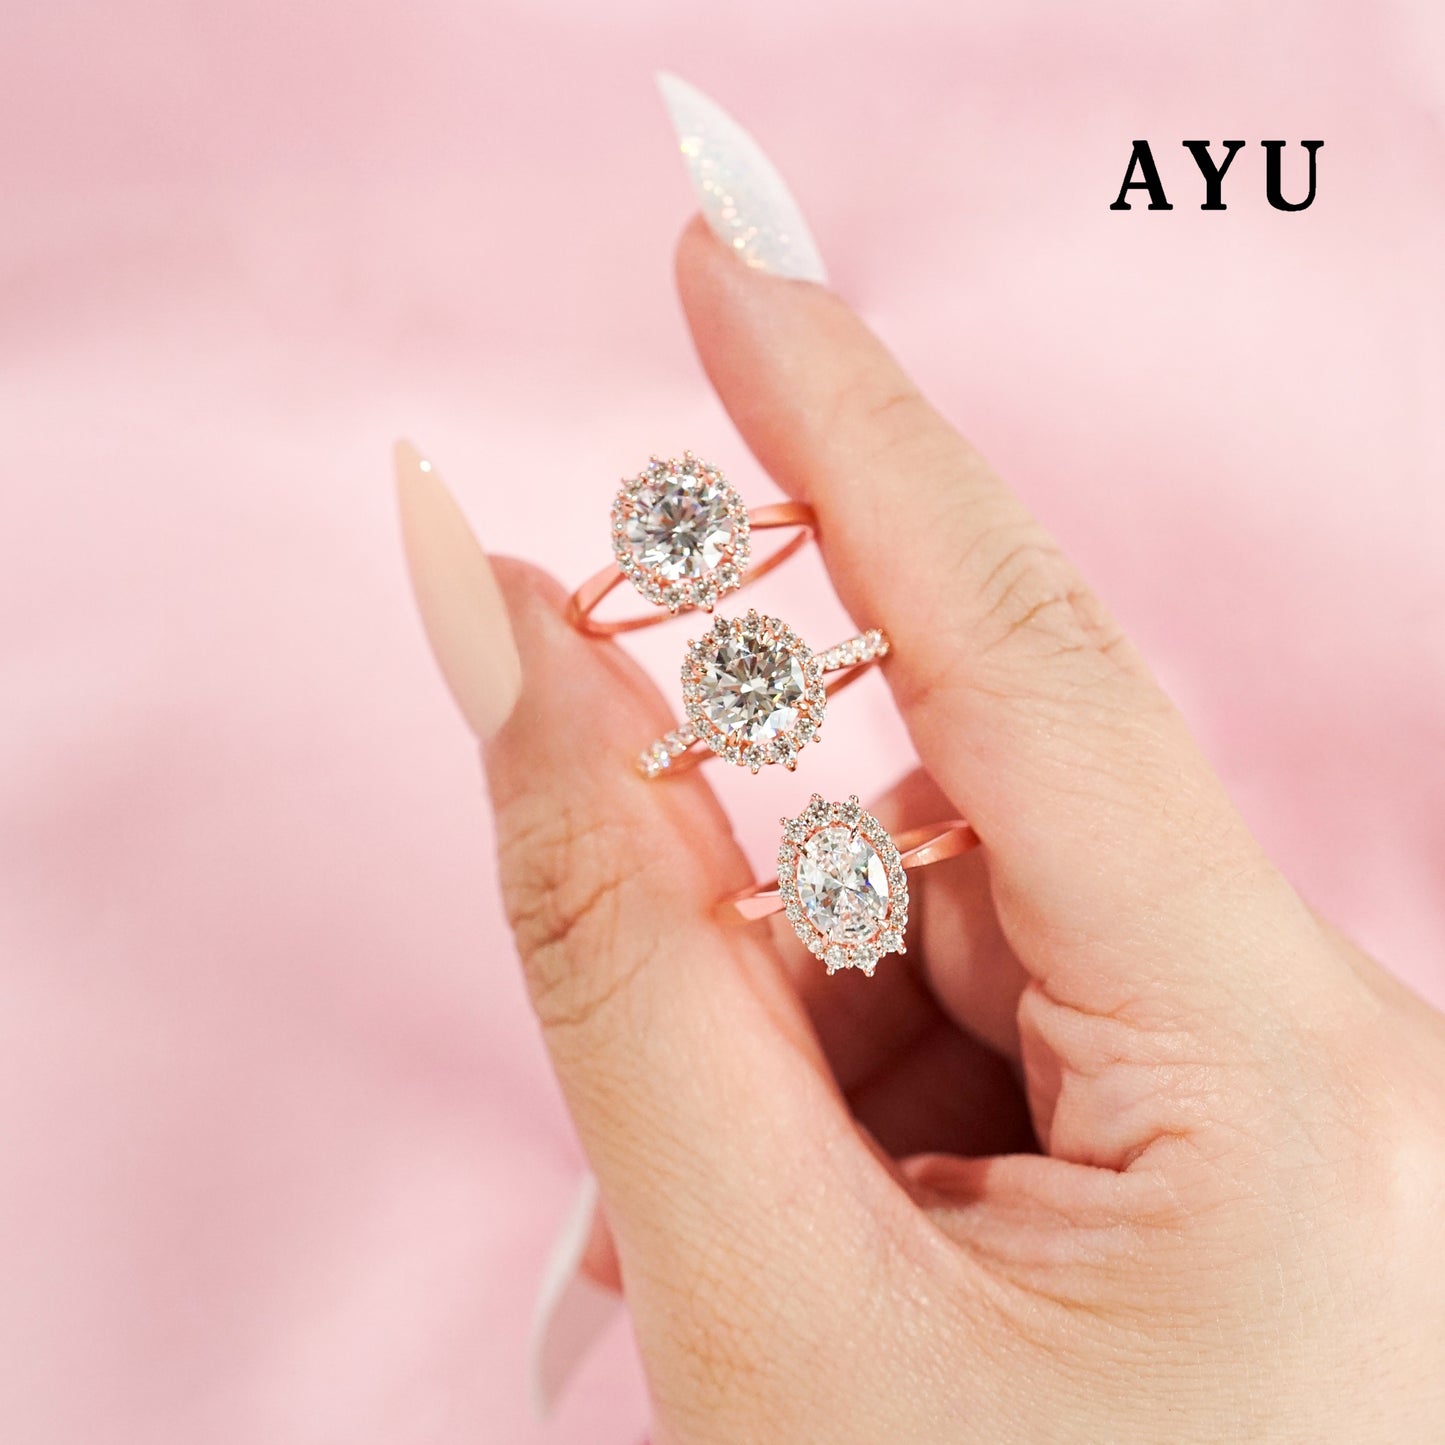 AYU Pave Round Grecian Solitaire 17k Rose Gold